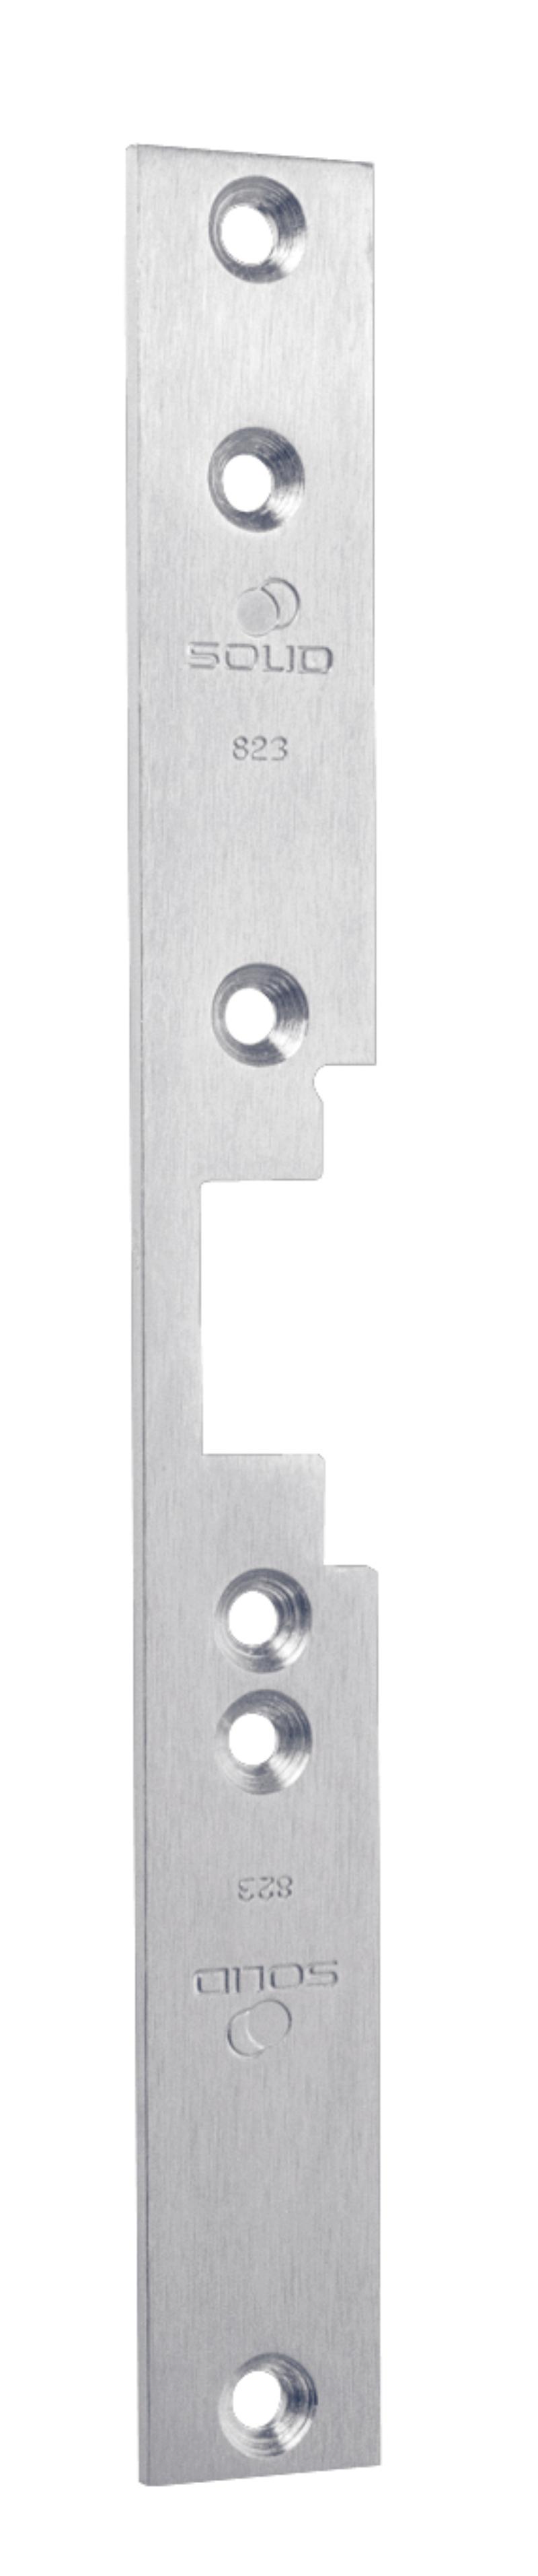 Solid post 823 electric end plate (935945)